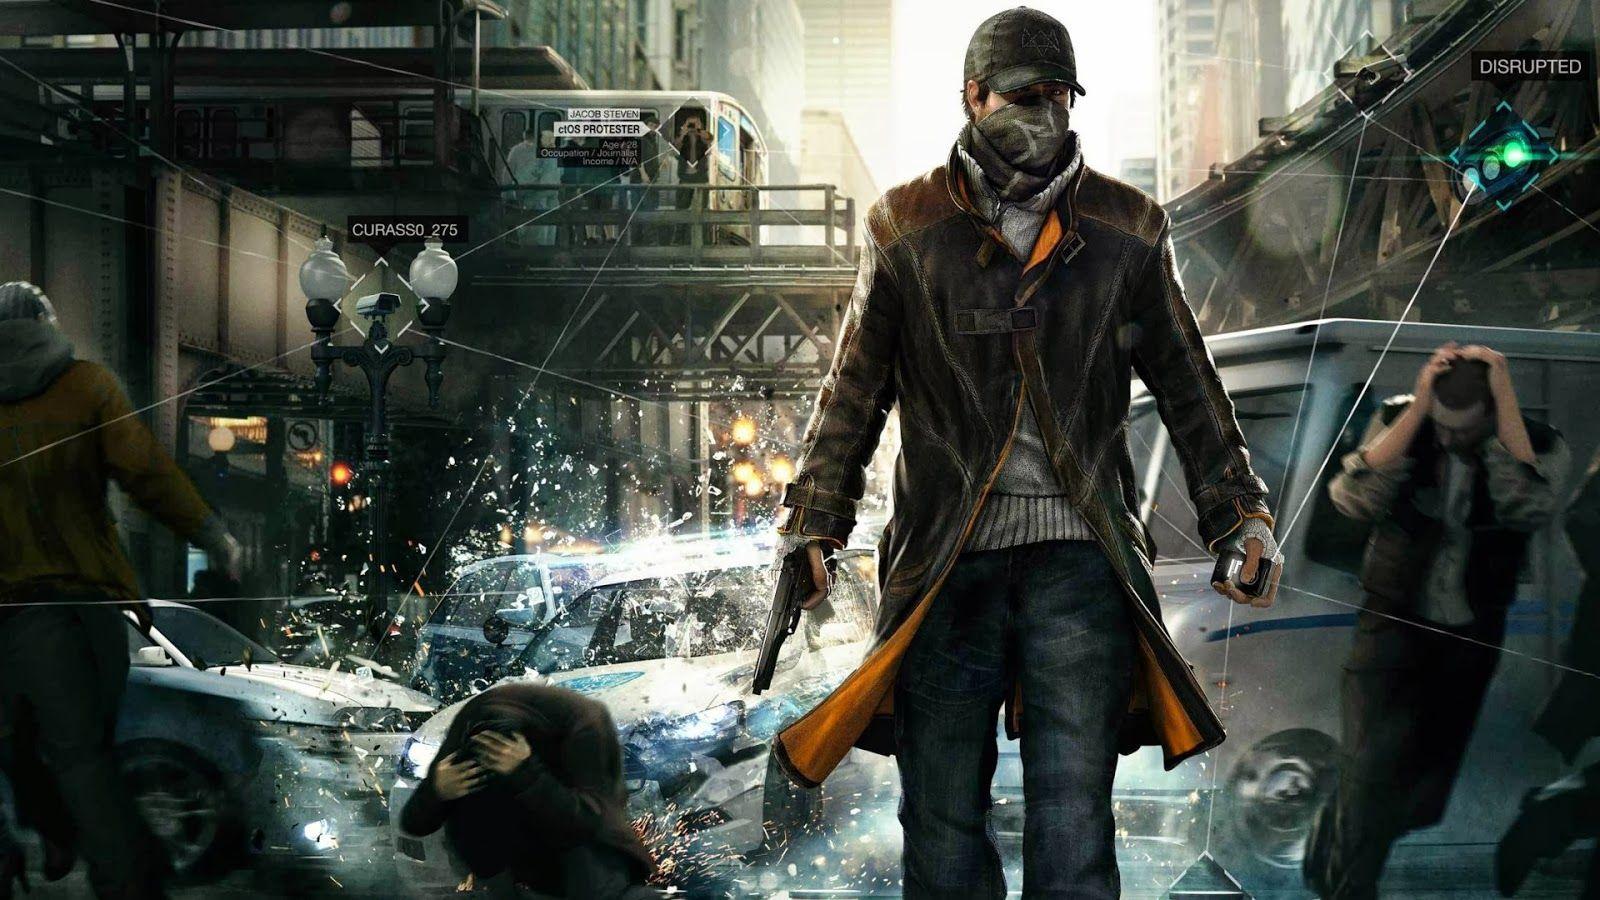 Watch Dogs 1 Wallpapers Wallpaper Cave